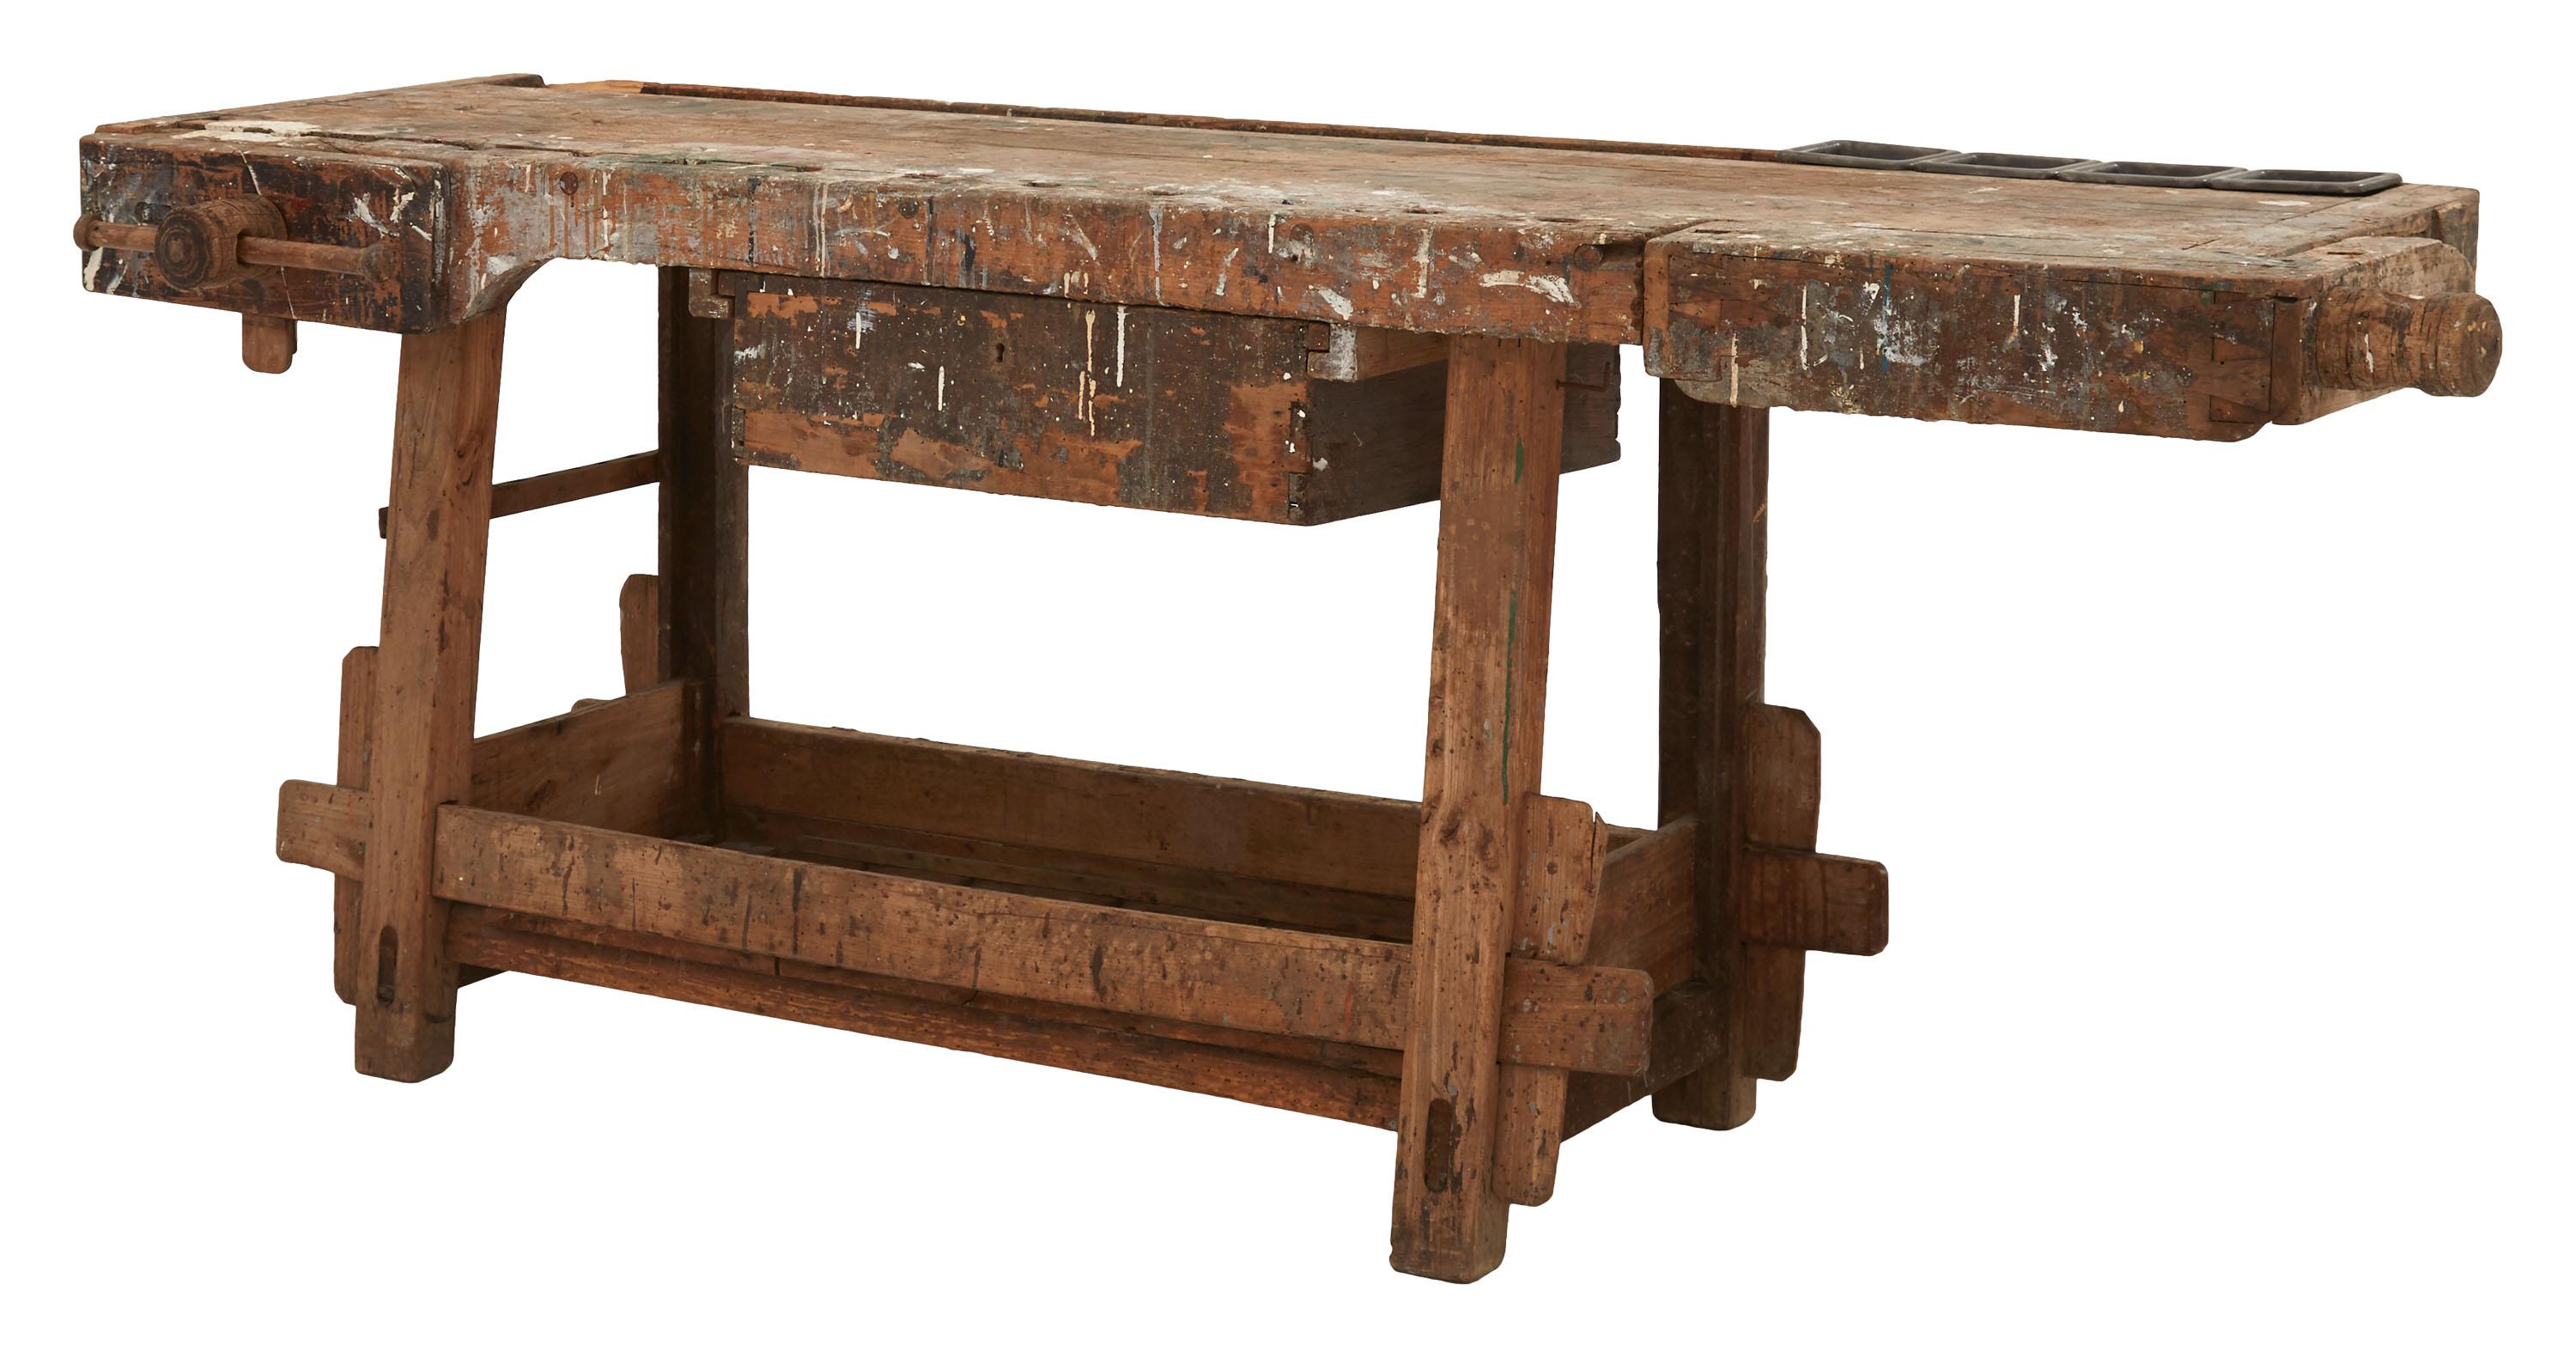 • Weathered wood finish
• 20th century
• France

Dimensions
• Overall: 89